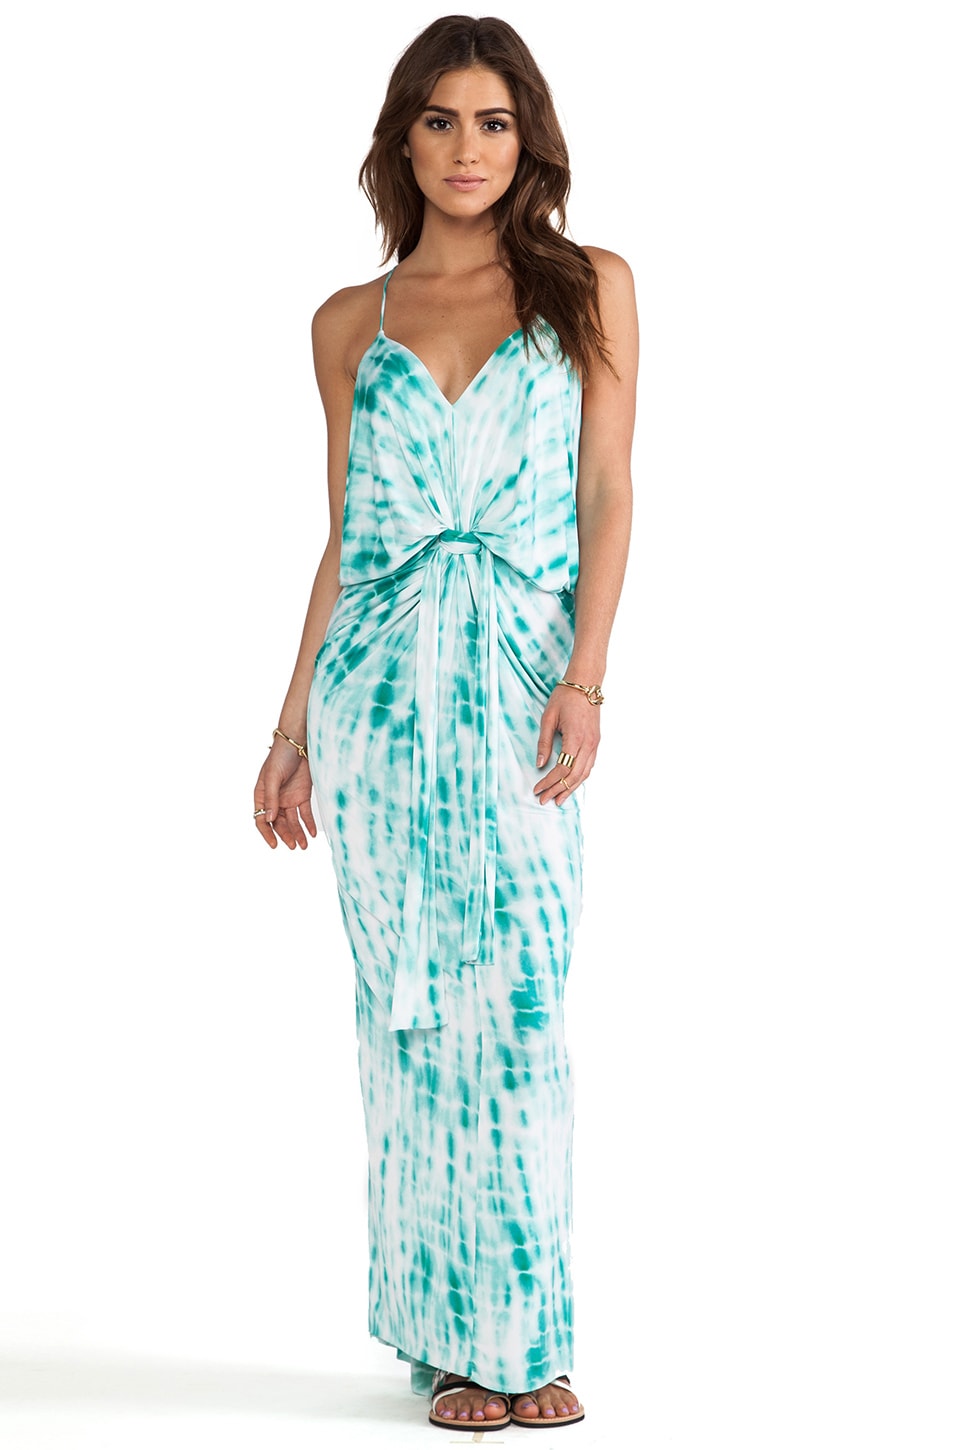 T-Bags LosAngeles Knot Front Maxi Dress in Turquoise Tie Dye | REVOLVE